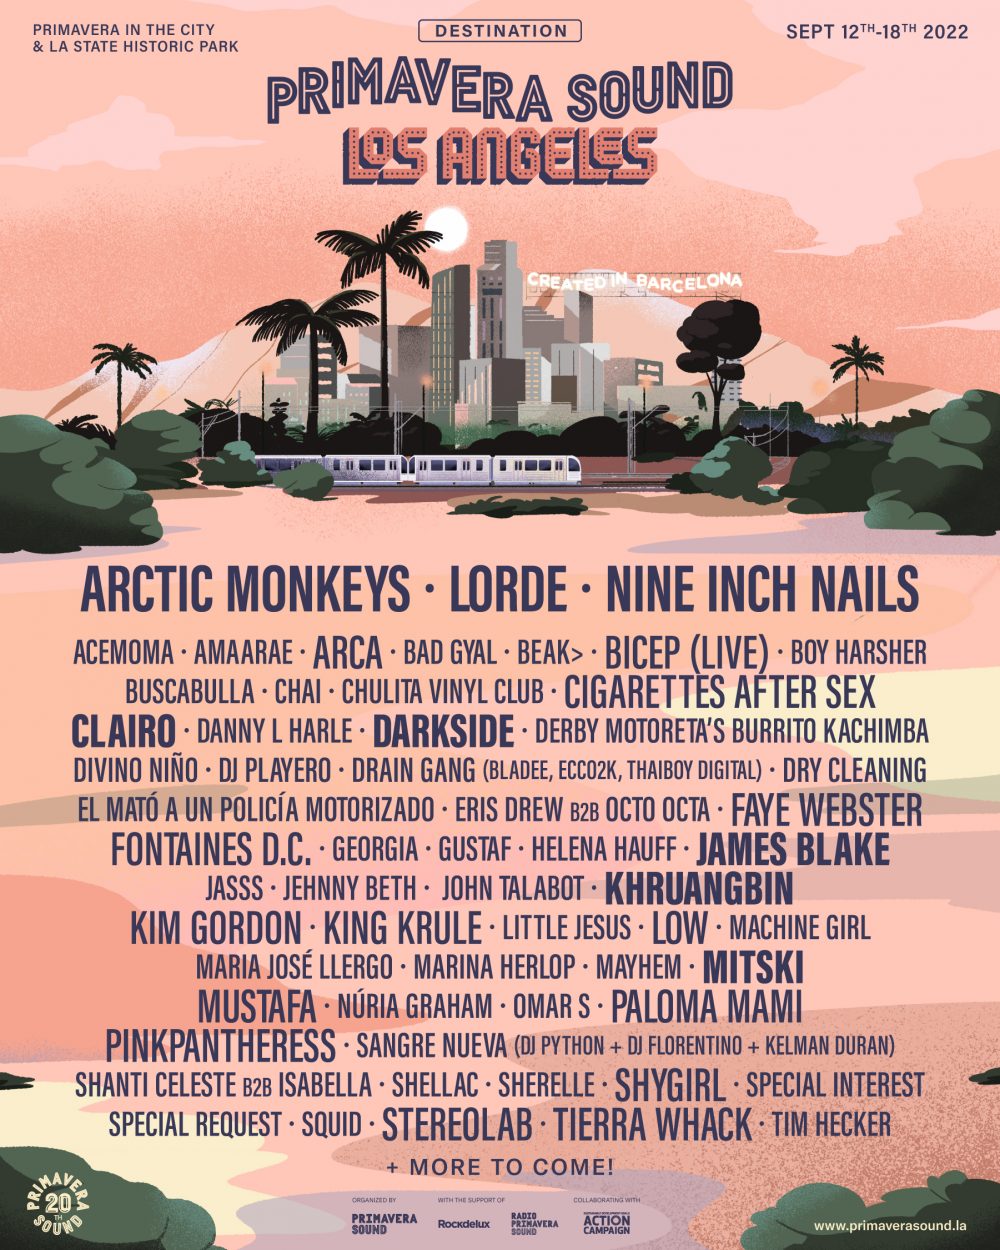 Primavera Sound Los Angeles Announces Initial Lineup for Debut Edition